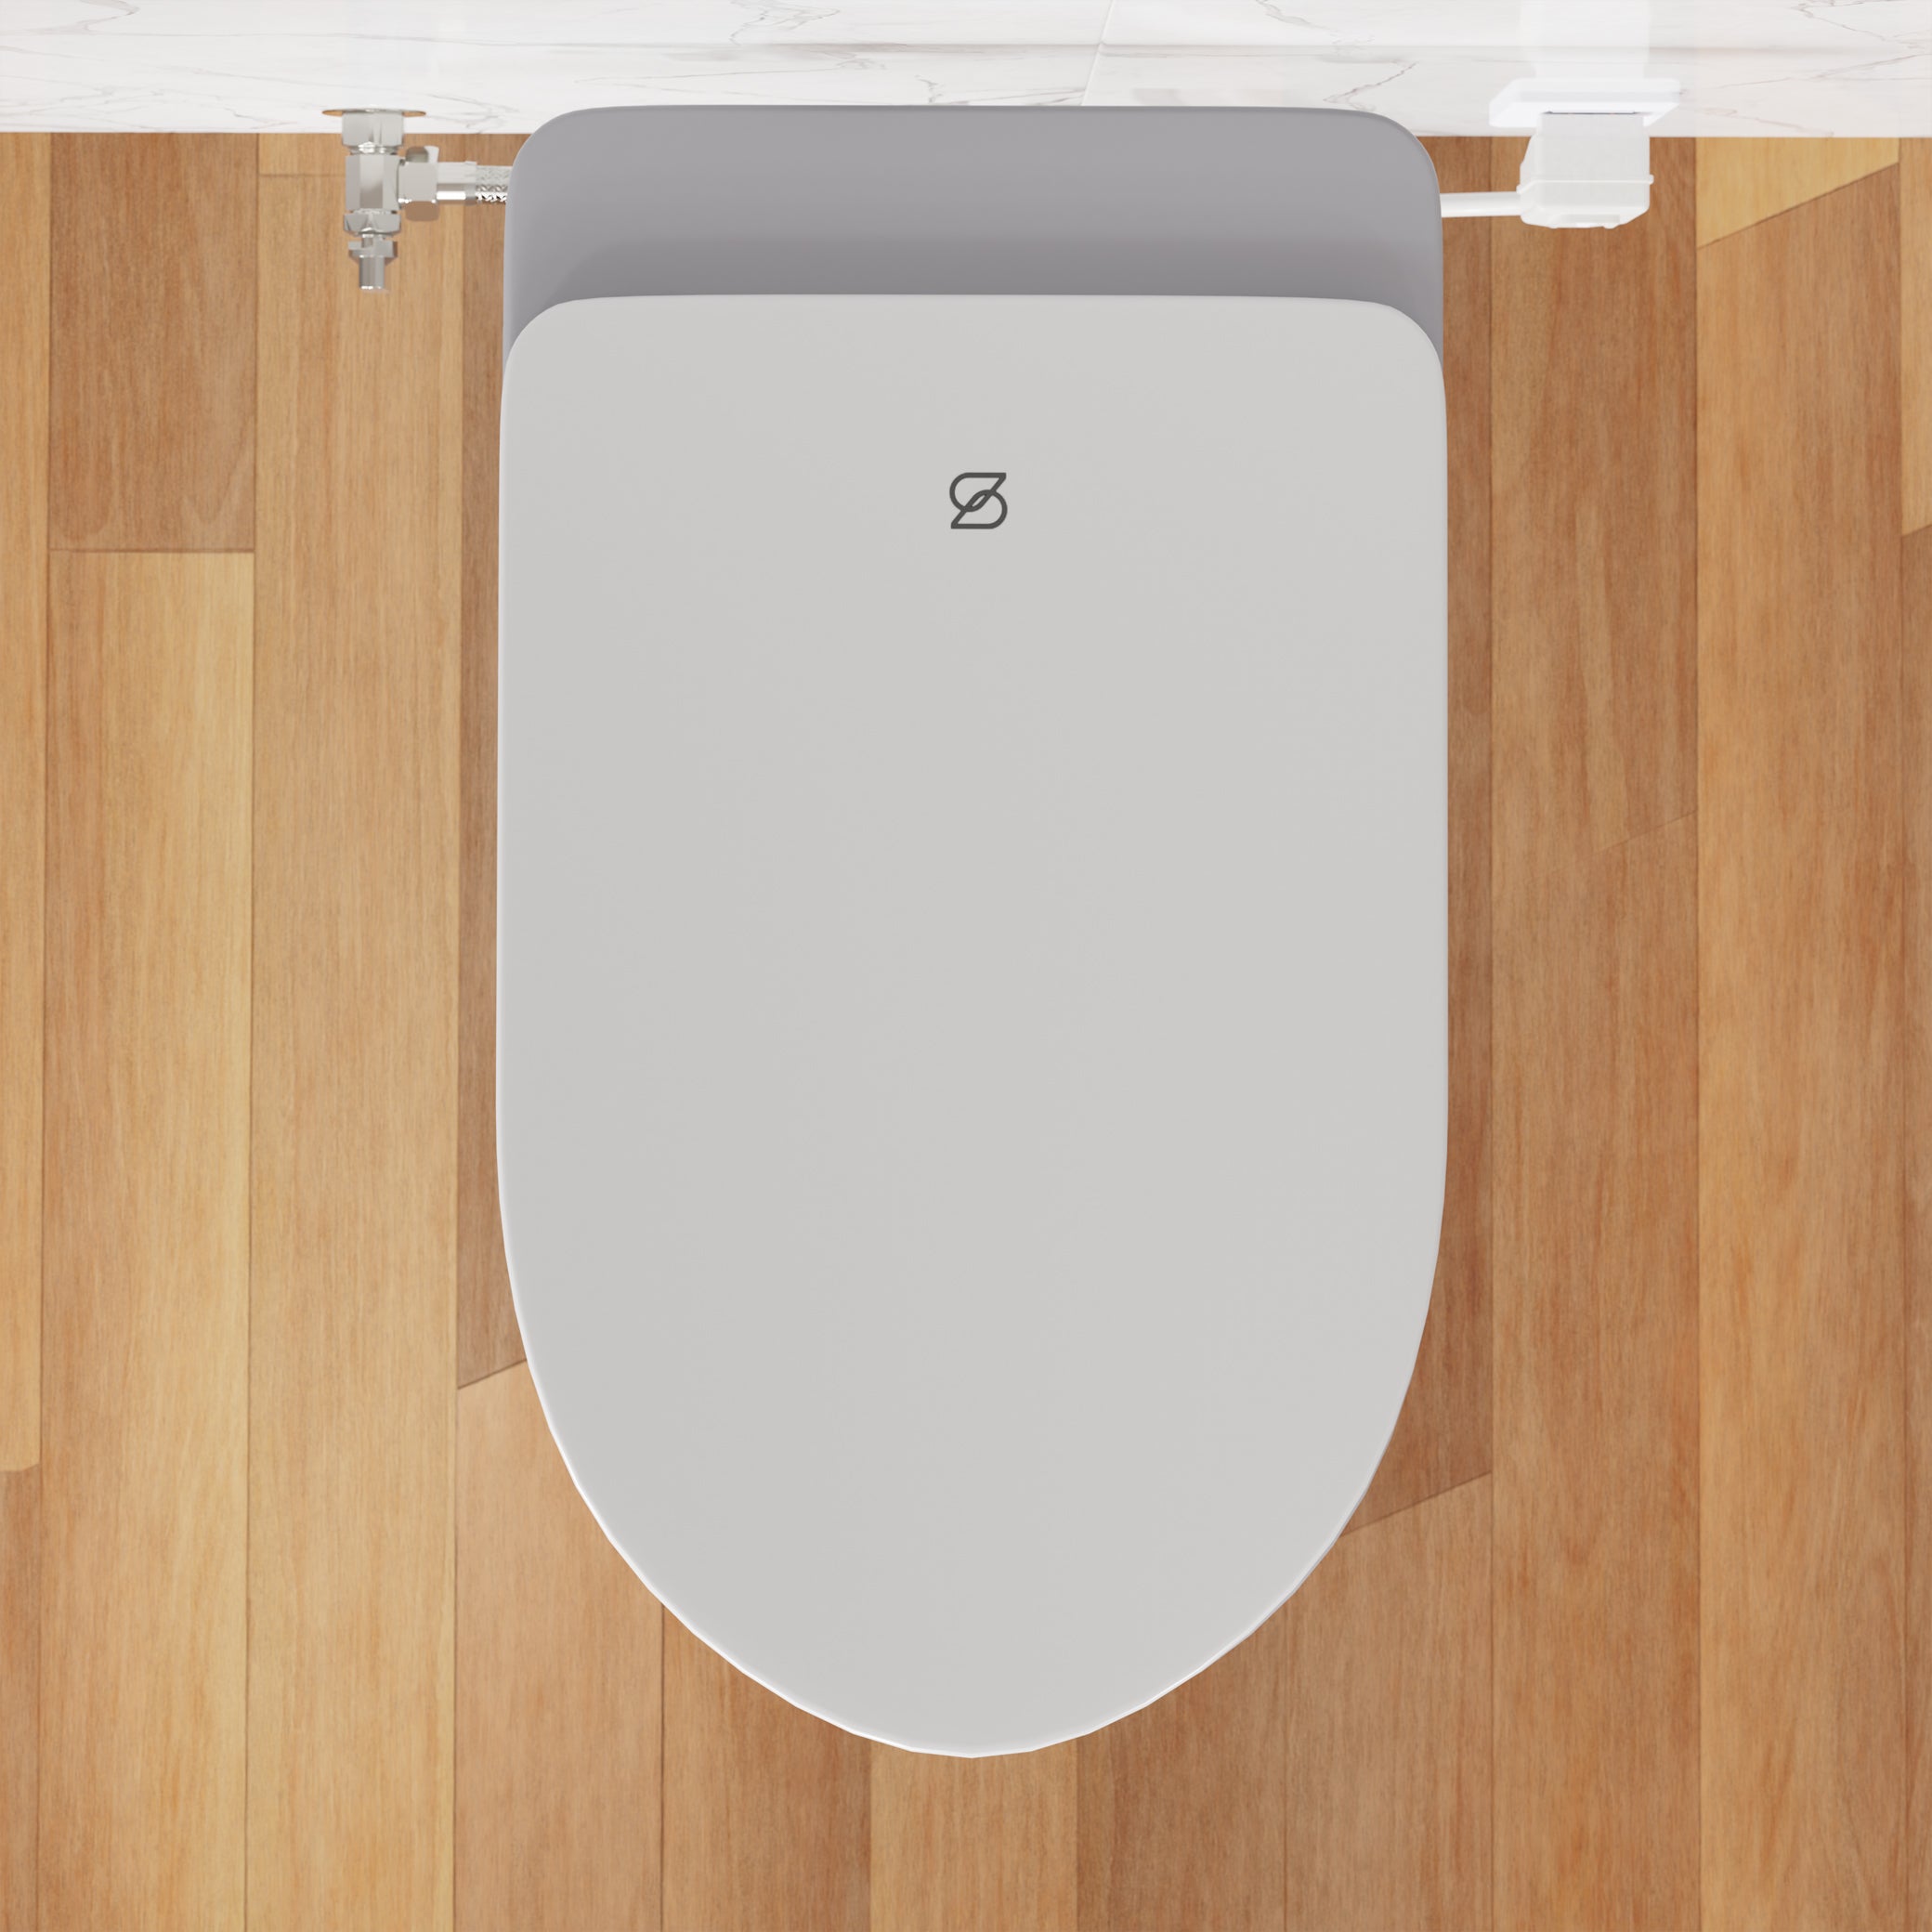 Top view of Ganza Smart Bidet Toilet with Efoam, ToeTouch, Auto Open, & White